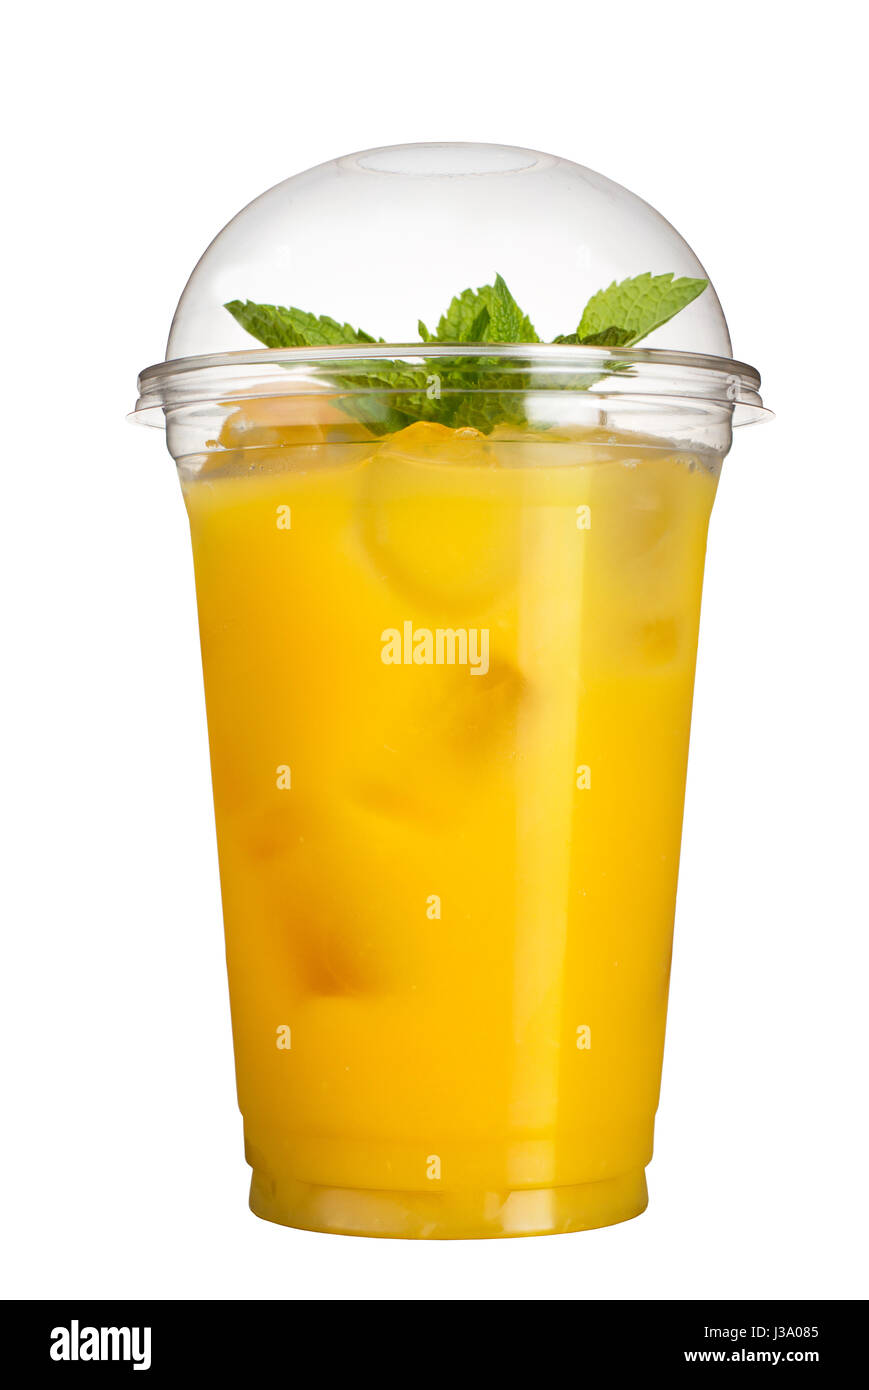 https://c8.alamy.com/comp/J3A085/take-away-drink-refreshing-drink-in-a-plastic-cup-pineapple-juice-J3A085.jpg